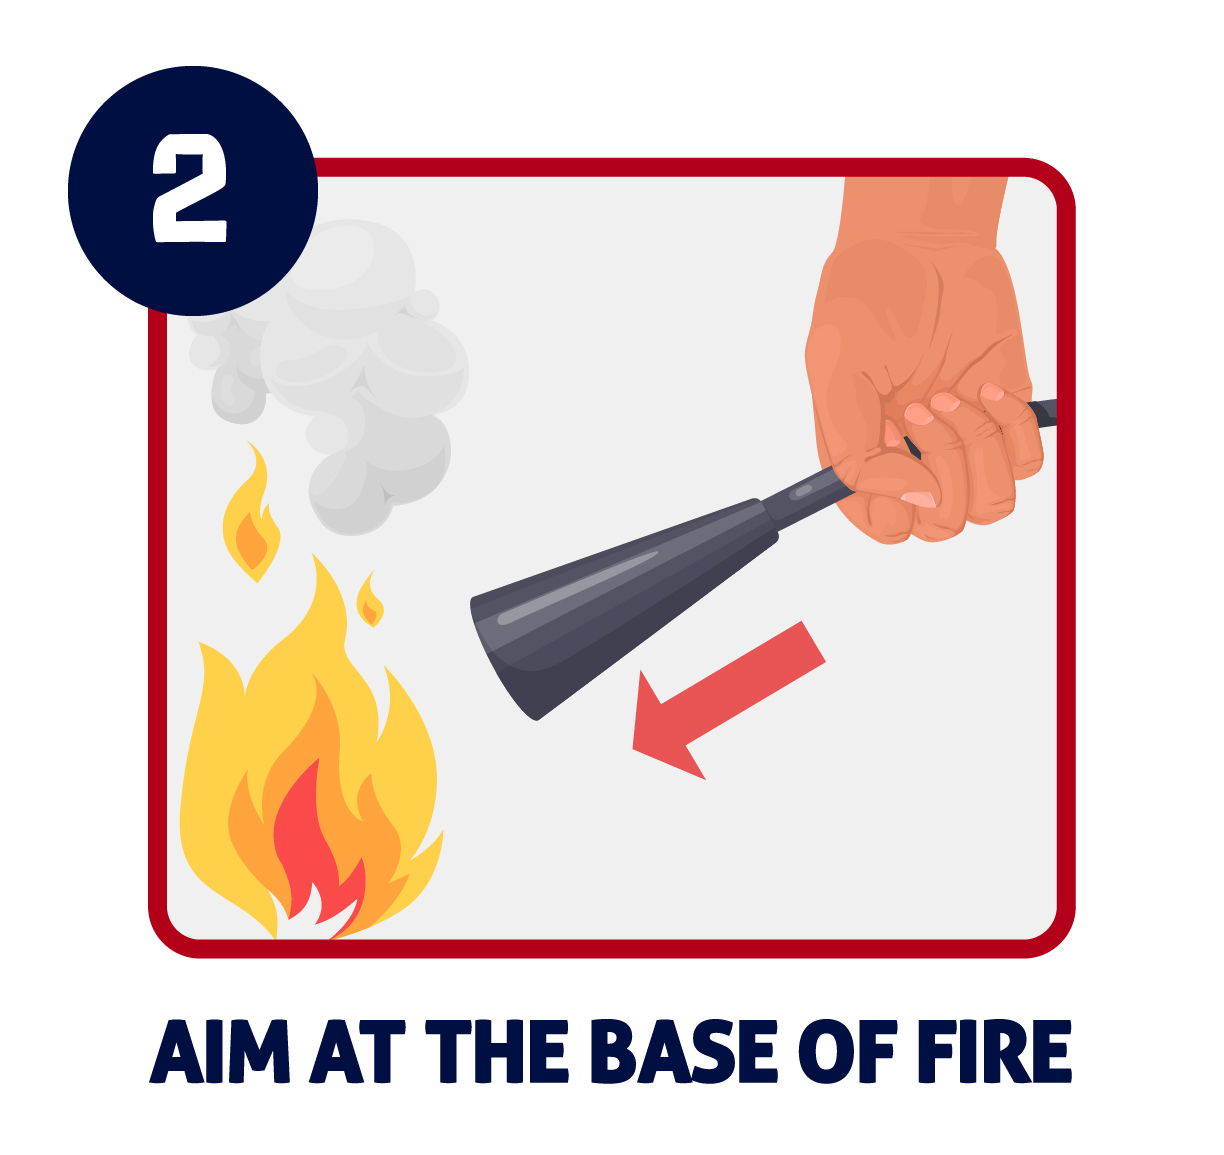 fire extinguisher instructional graphic with a cartoon hand pointing a fire extinguisher hose at a fire